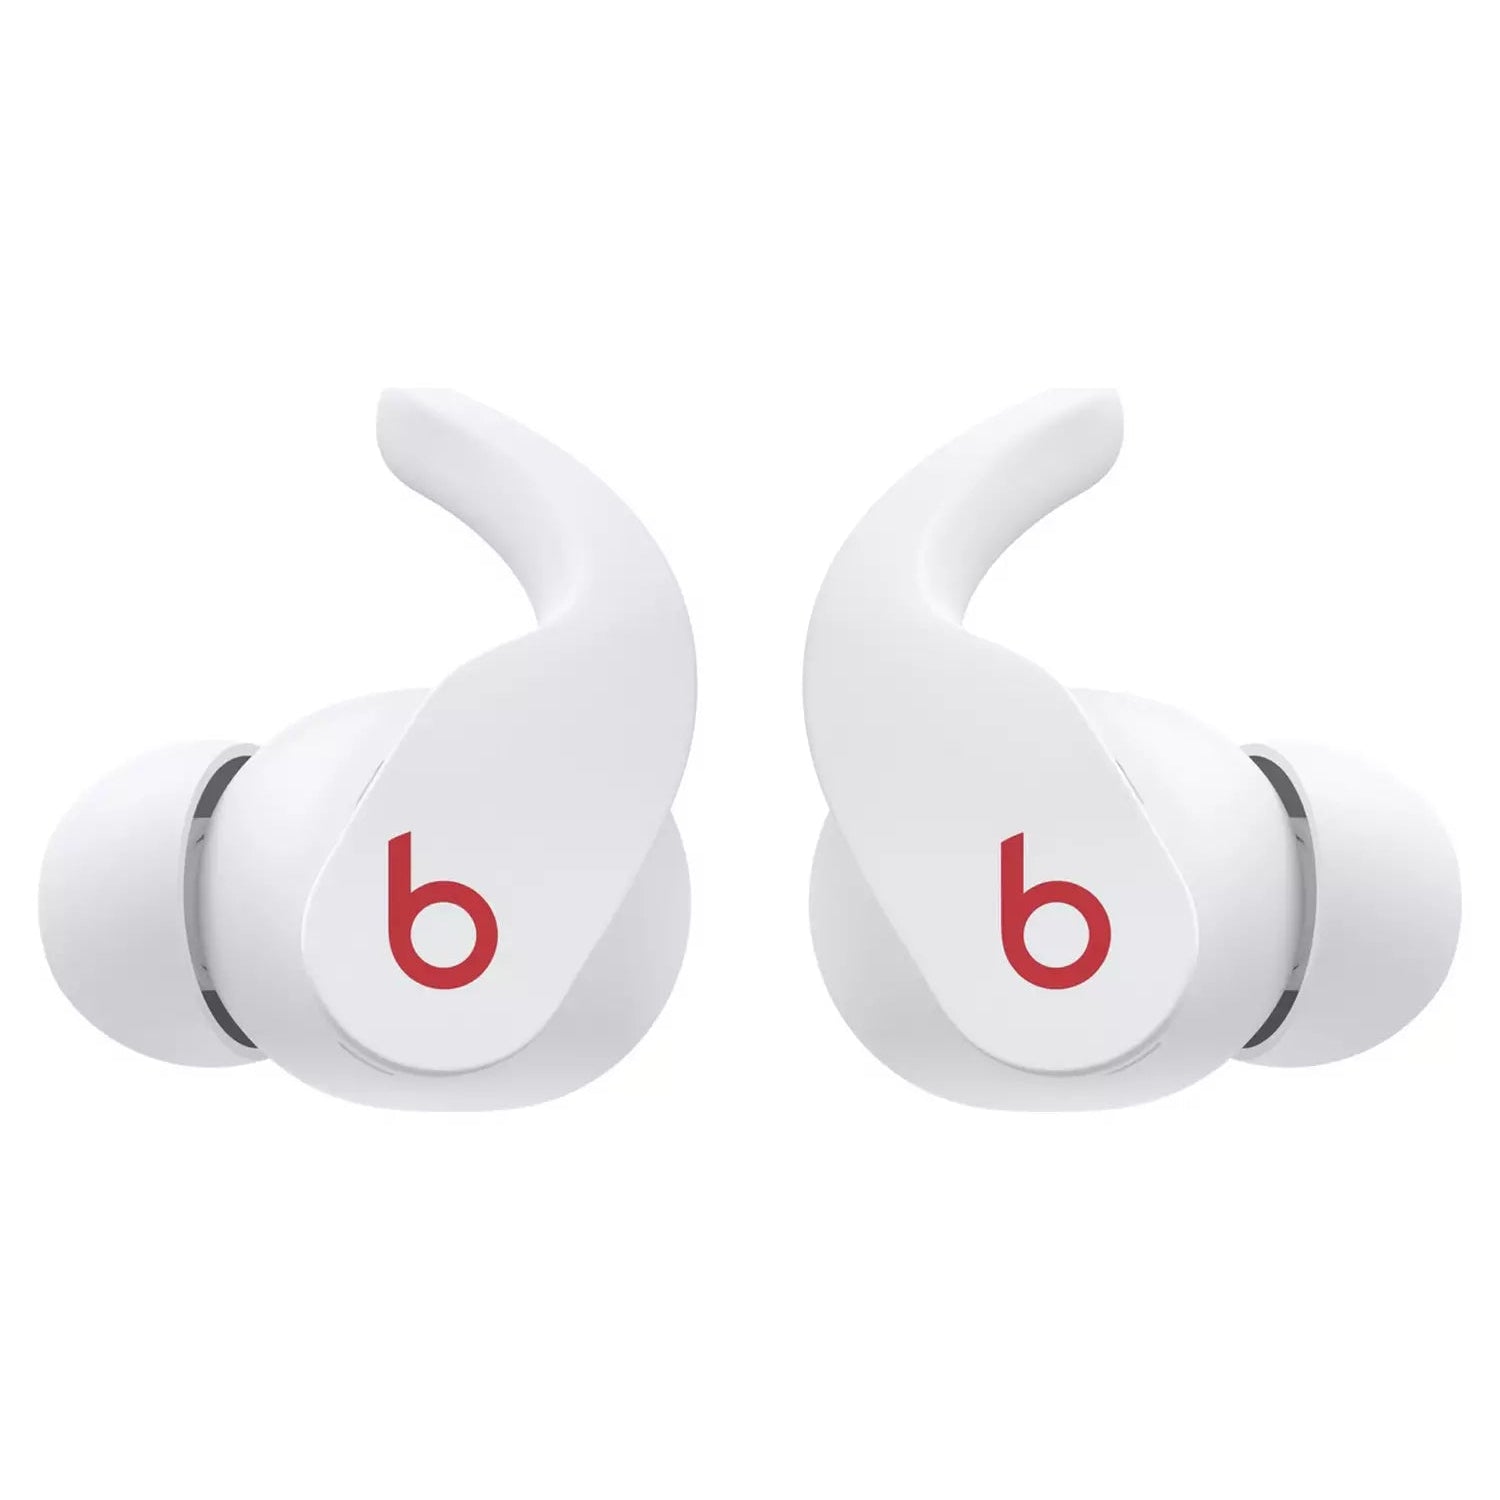 Beats Fit Pro True Wireless In-Ear Earbuds - White - Refurbished Excellent